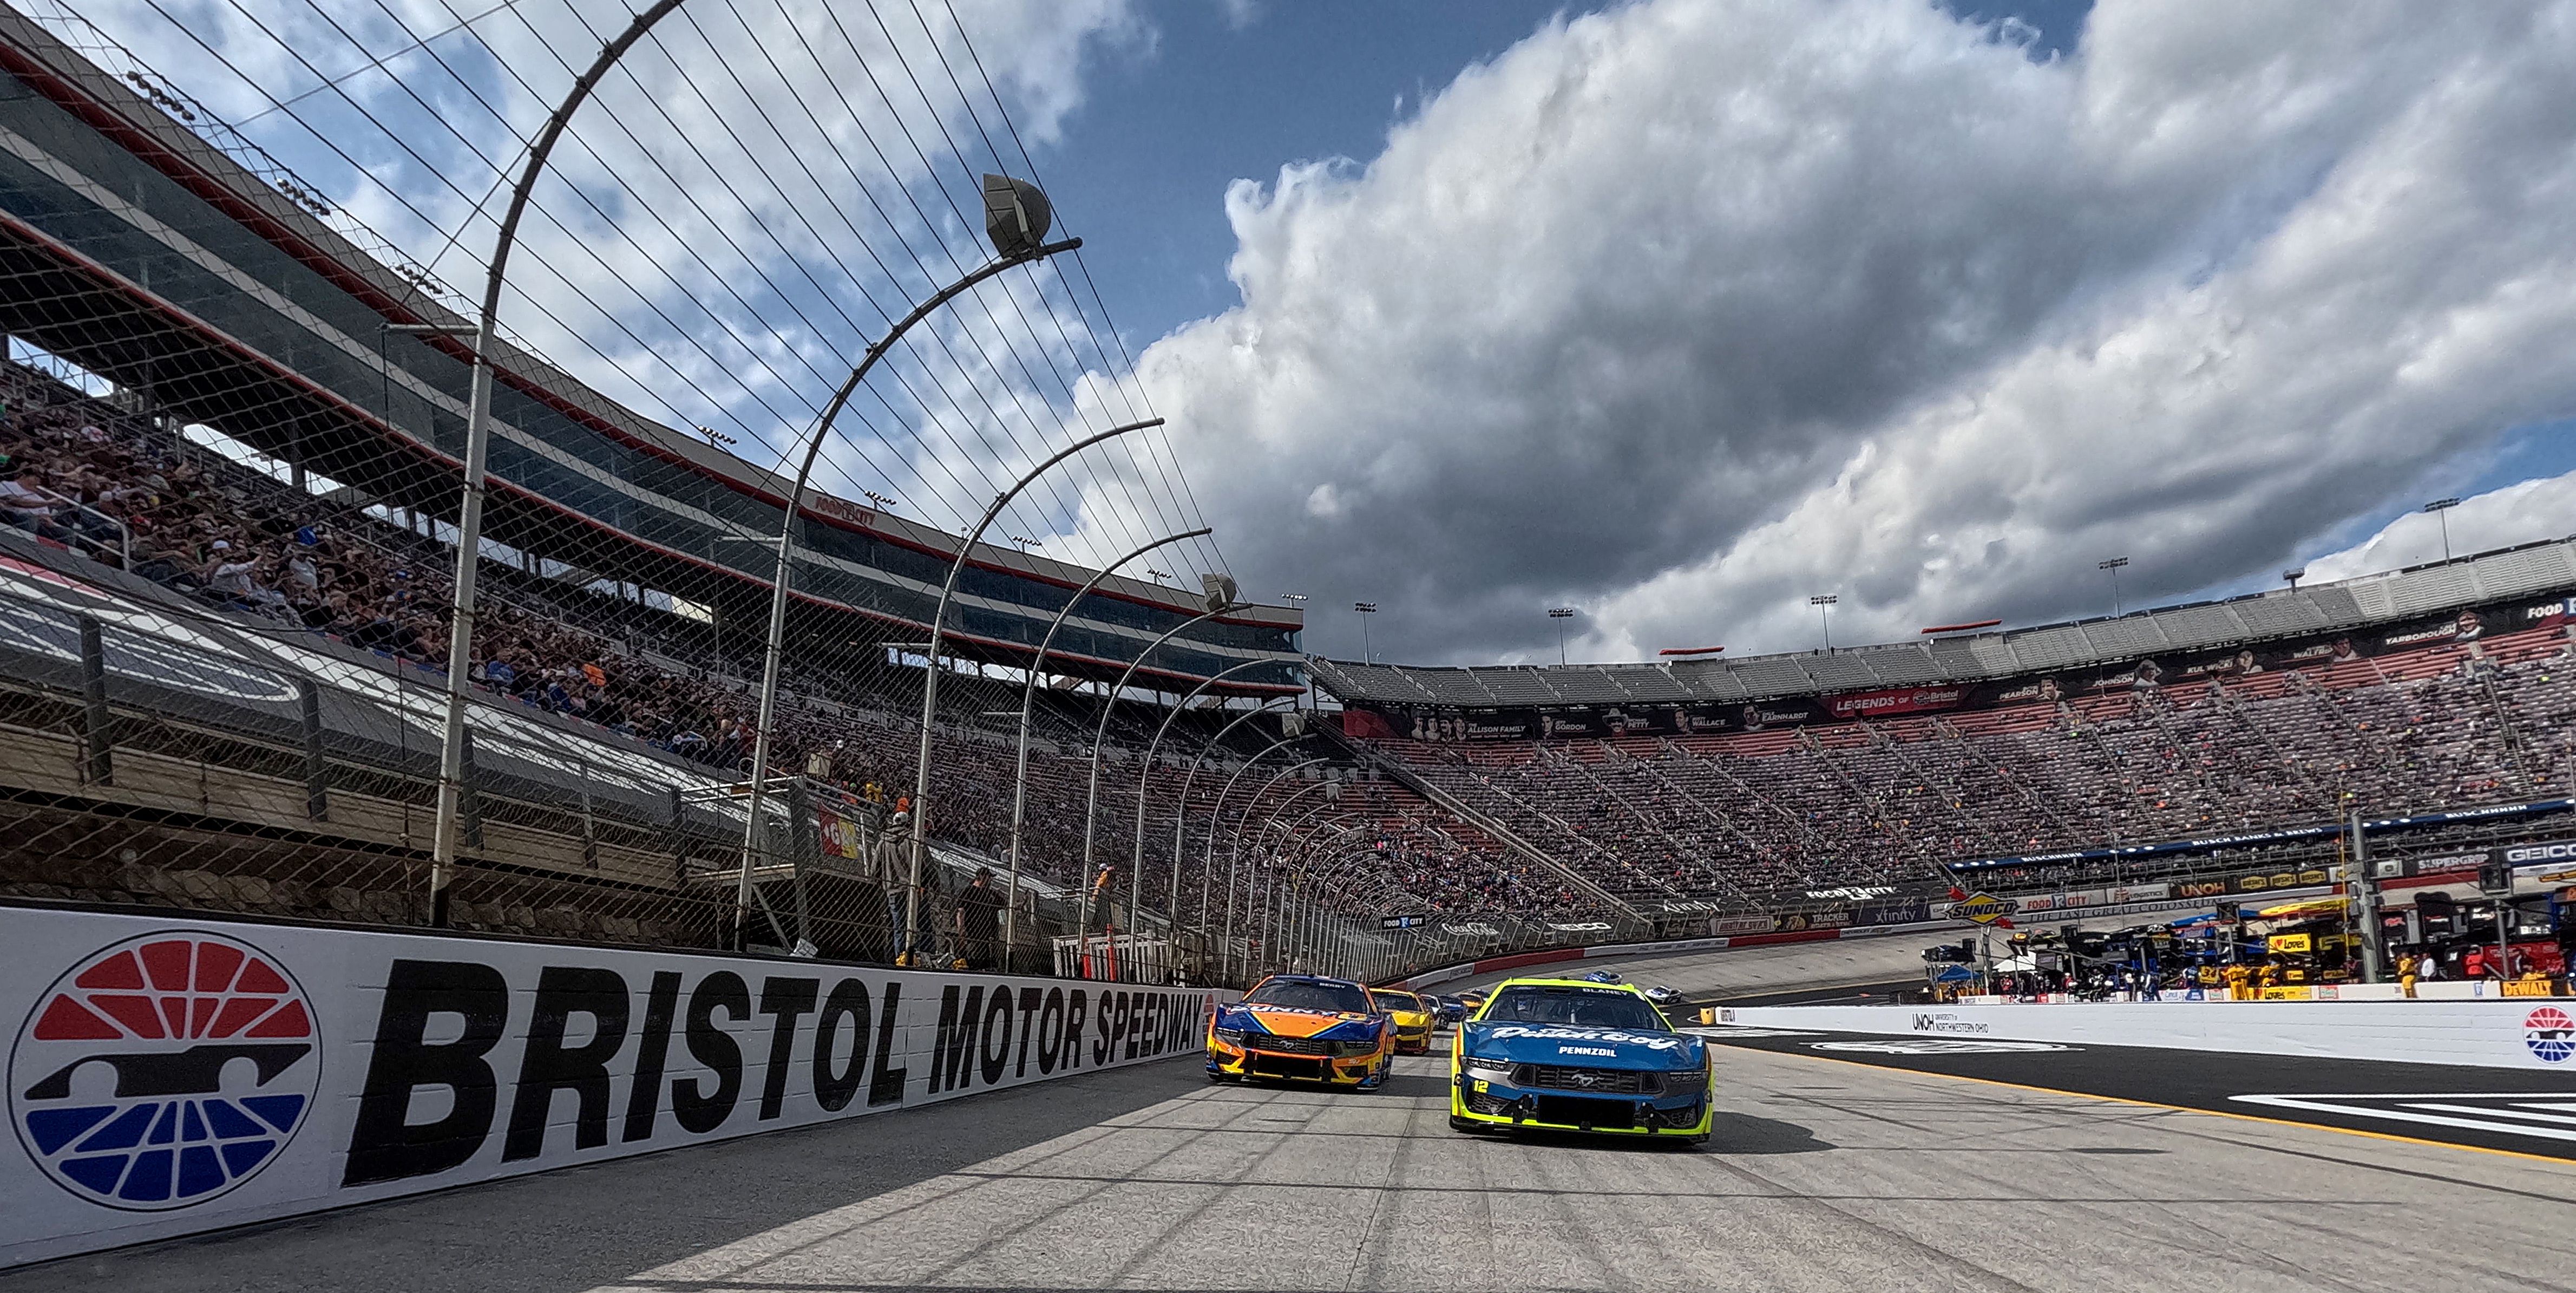 Bristol Motor Speedway Roasted Online Over Graphic Showing Racers Going Wrong Way